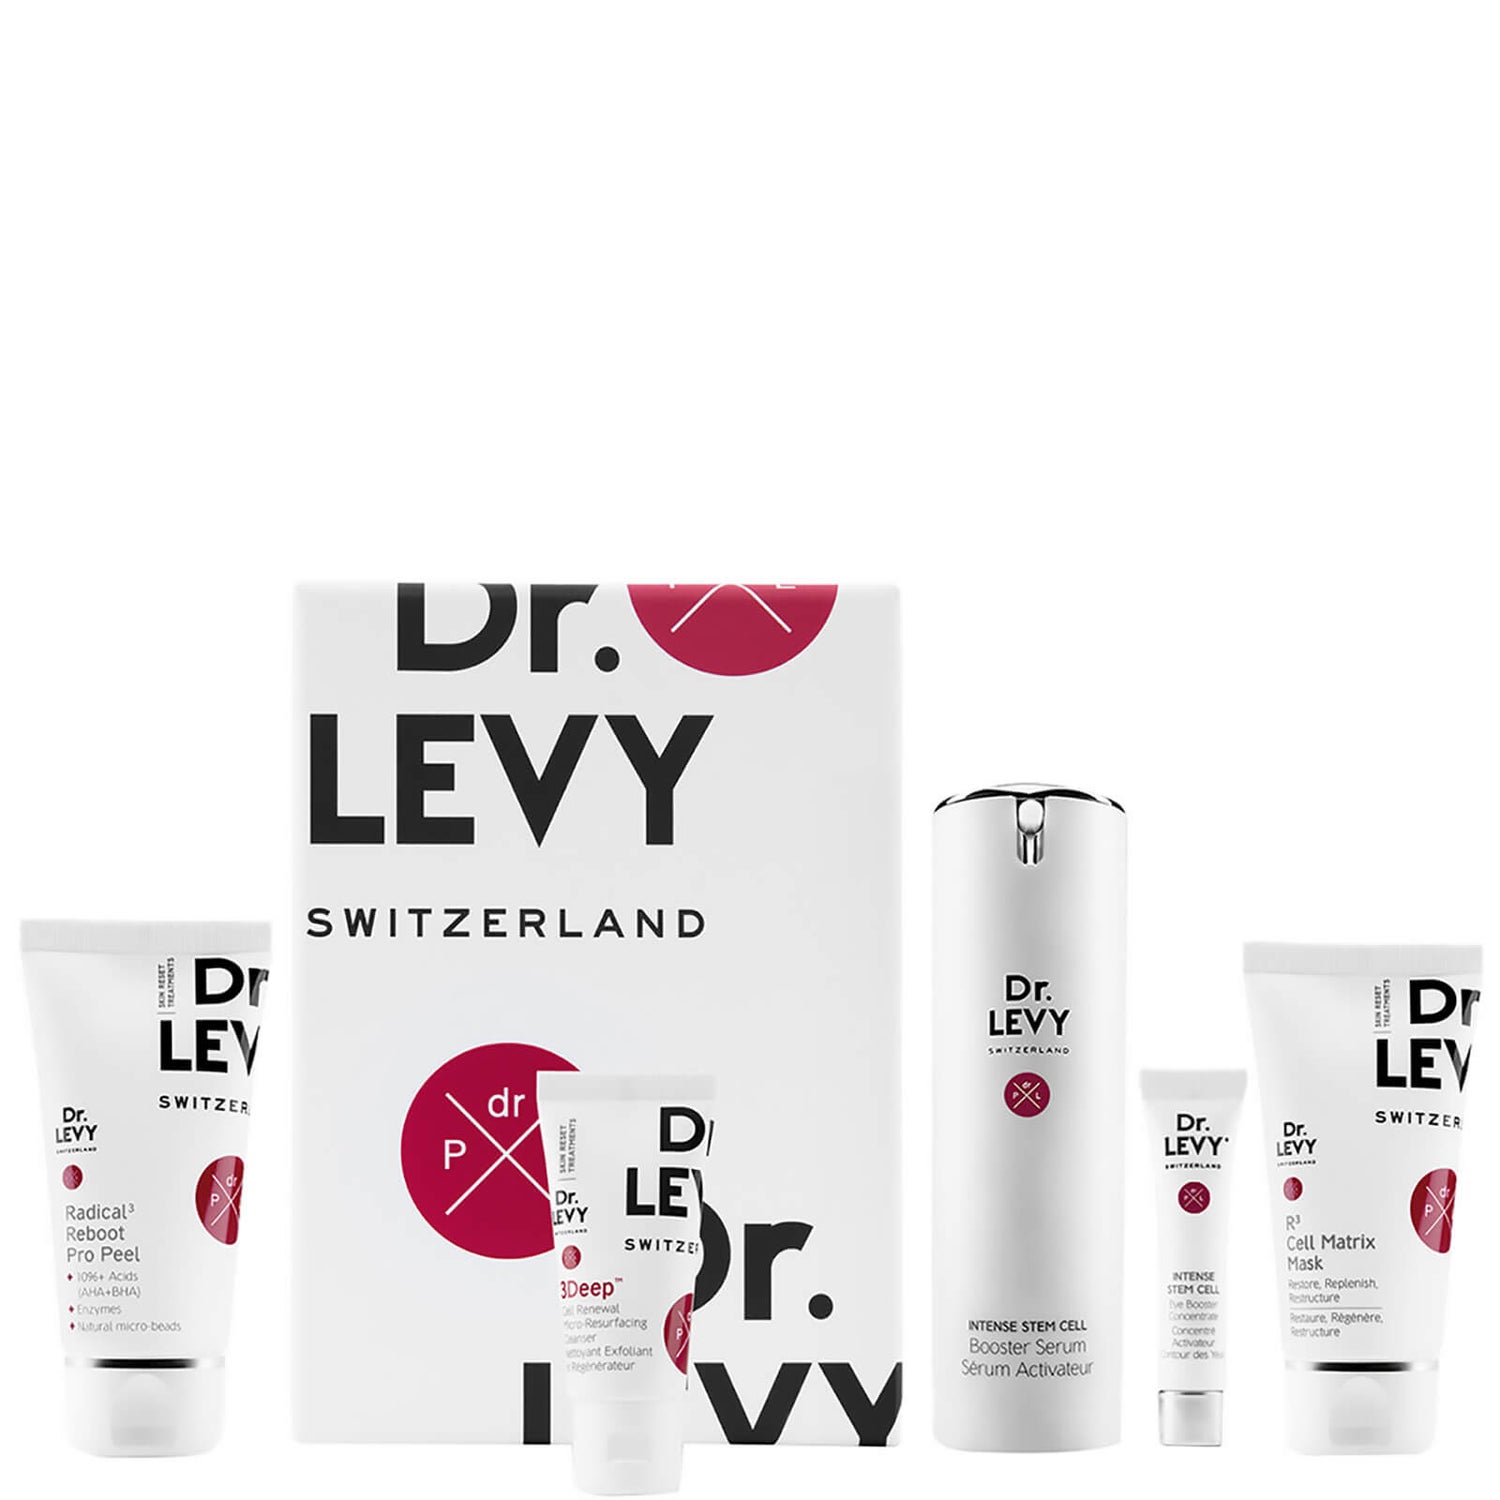 Dr. LEVY Switzerland The Peel & Reboot Spring Cure